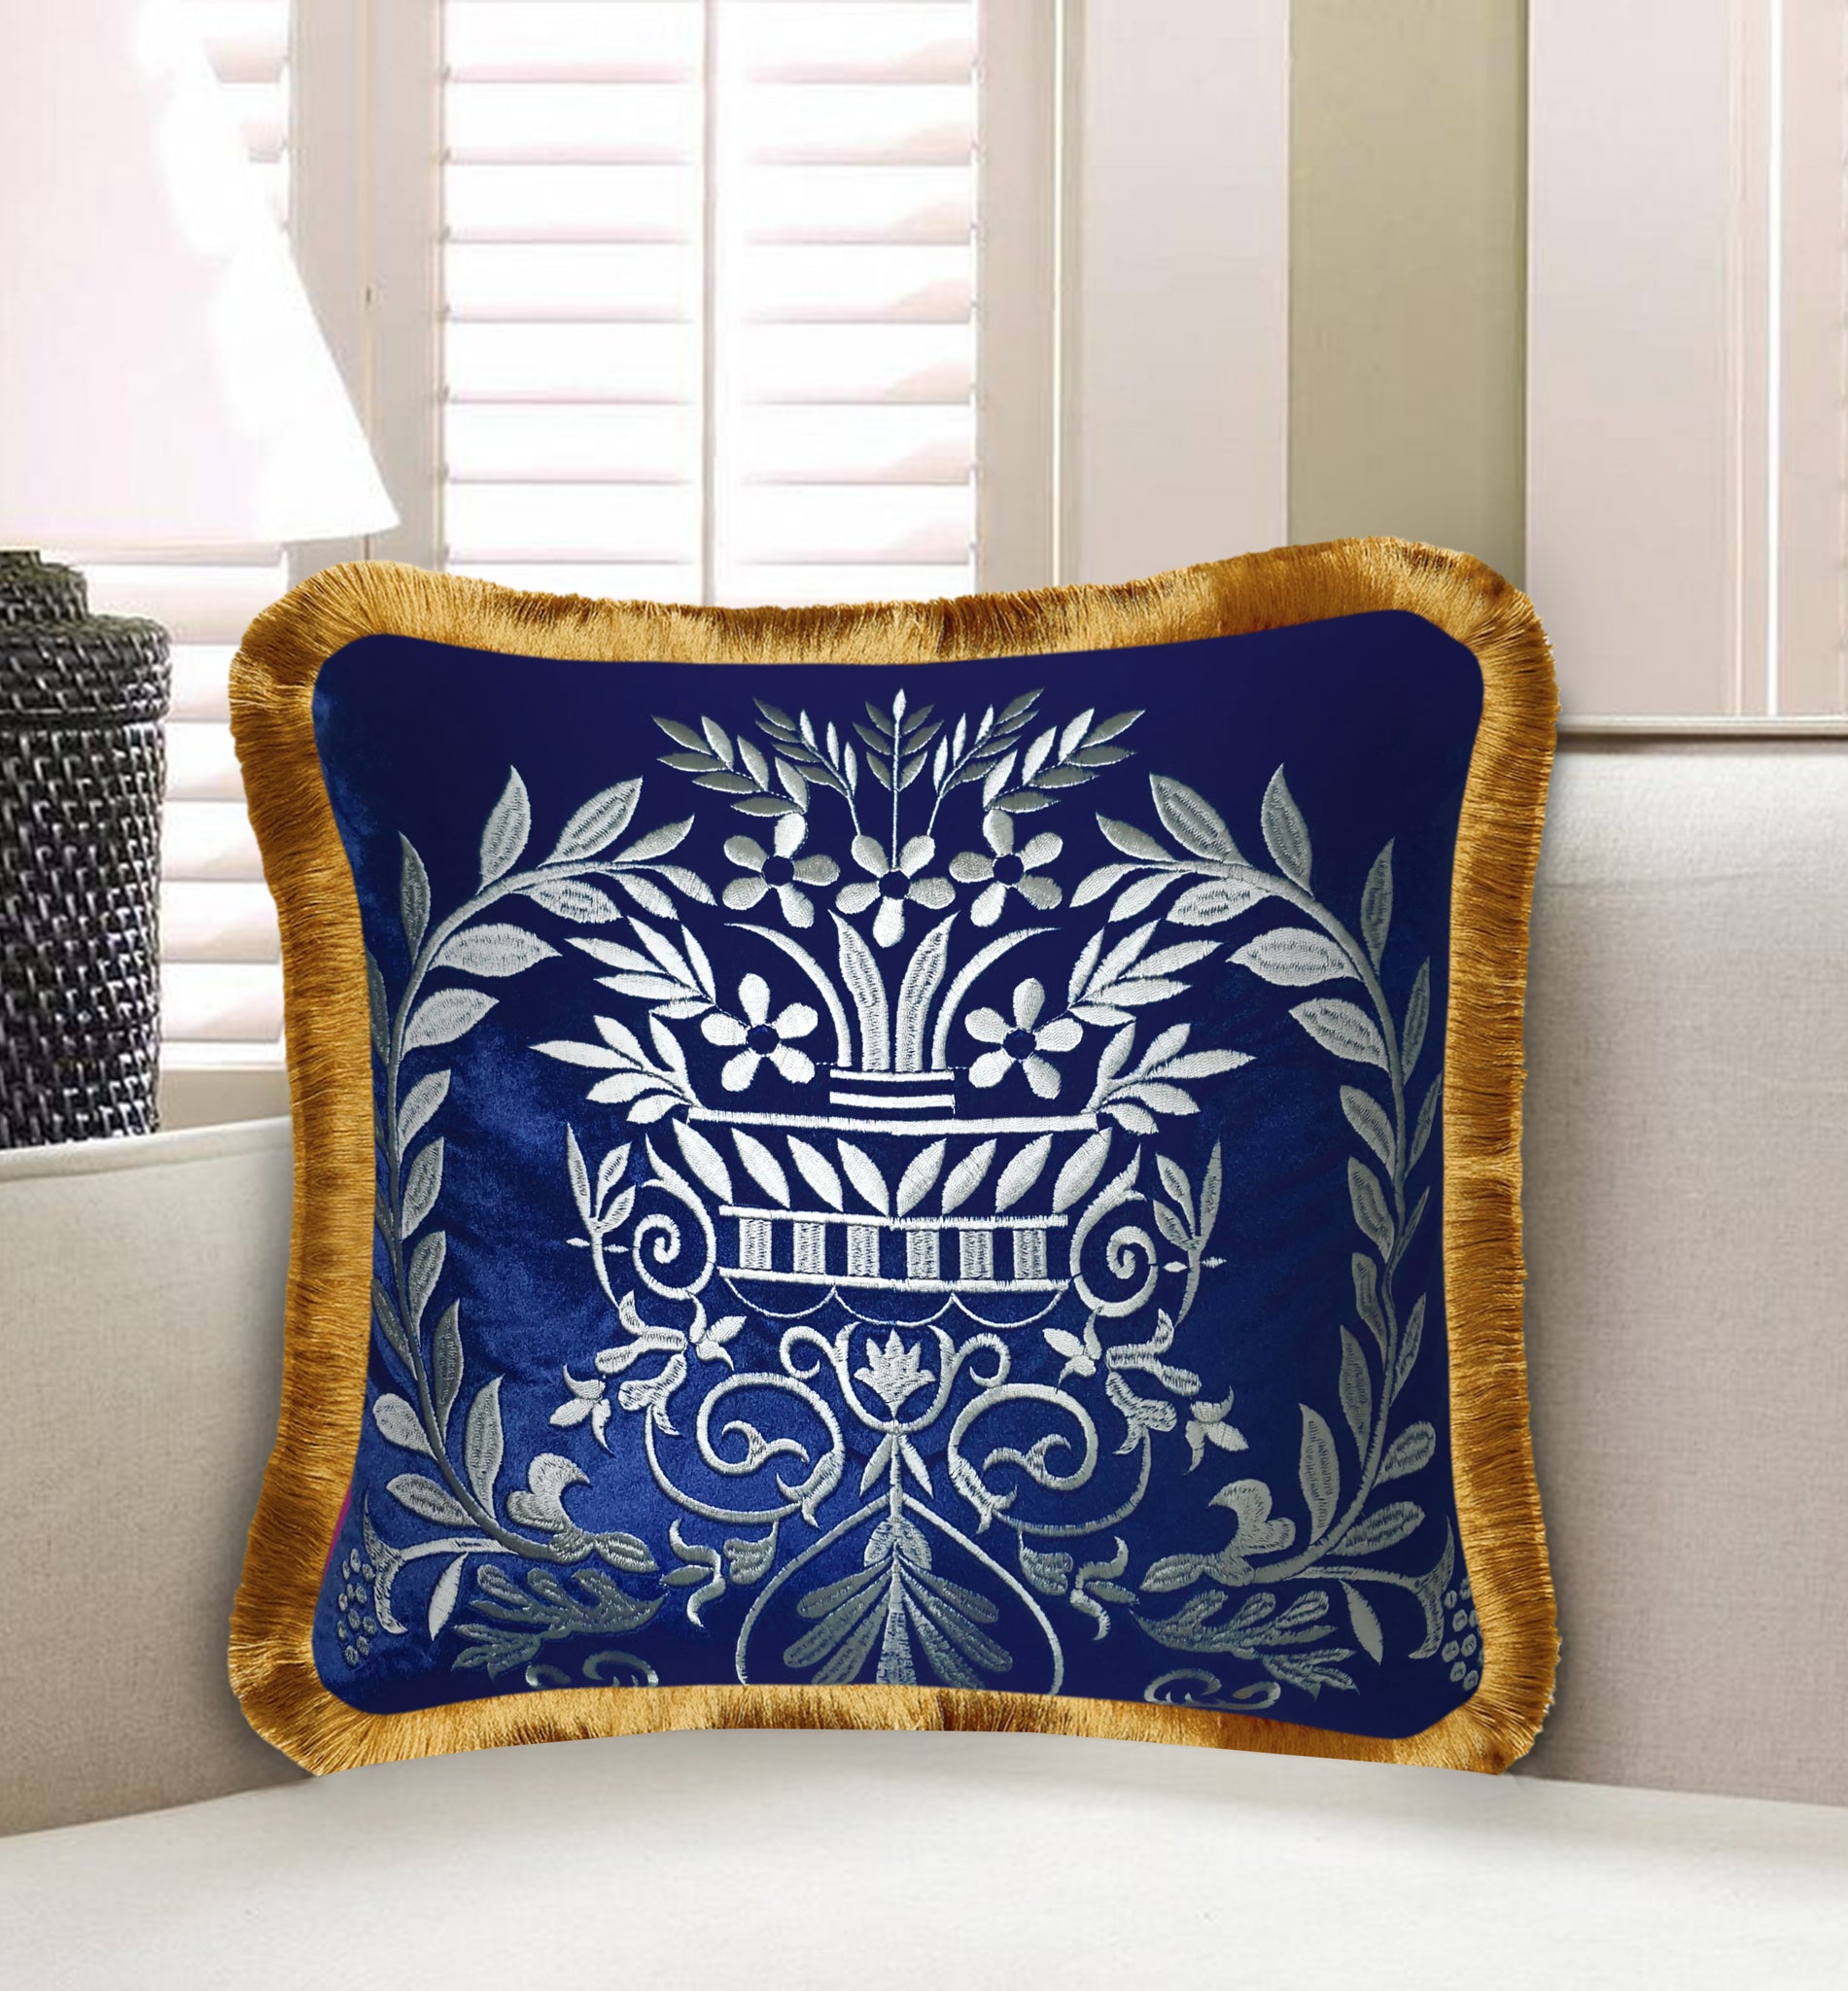 Velvet Cushion Cover Embroidery Iconic Baroque Motif Decorative Pillow European Style Home Decor Throw Pillow for Sofa 45x45 cm 18x18 In